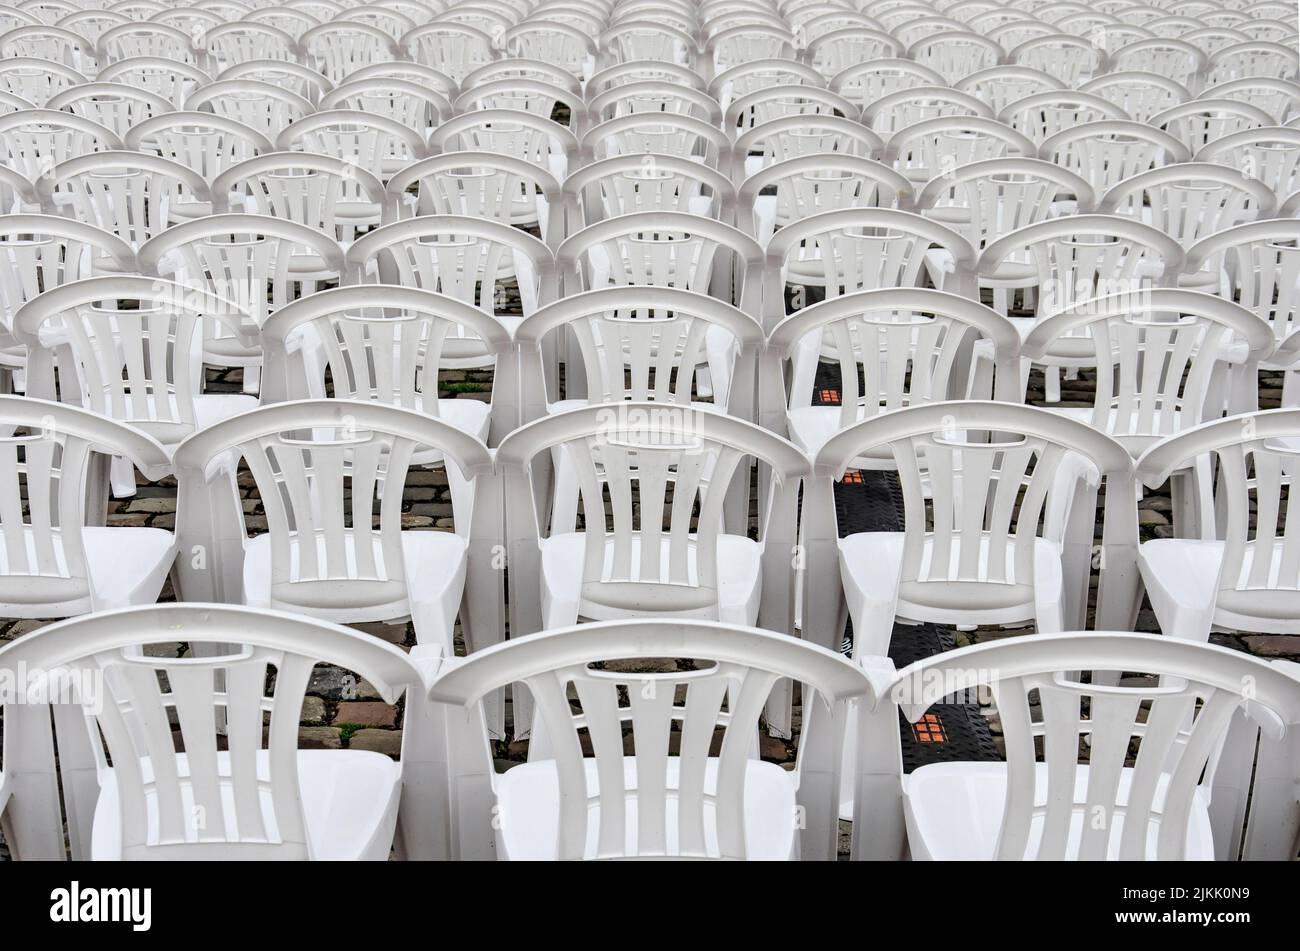 Seemingly endless number of rows of white plastic chairs in an outdoor setting Stock Photo